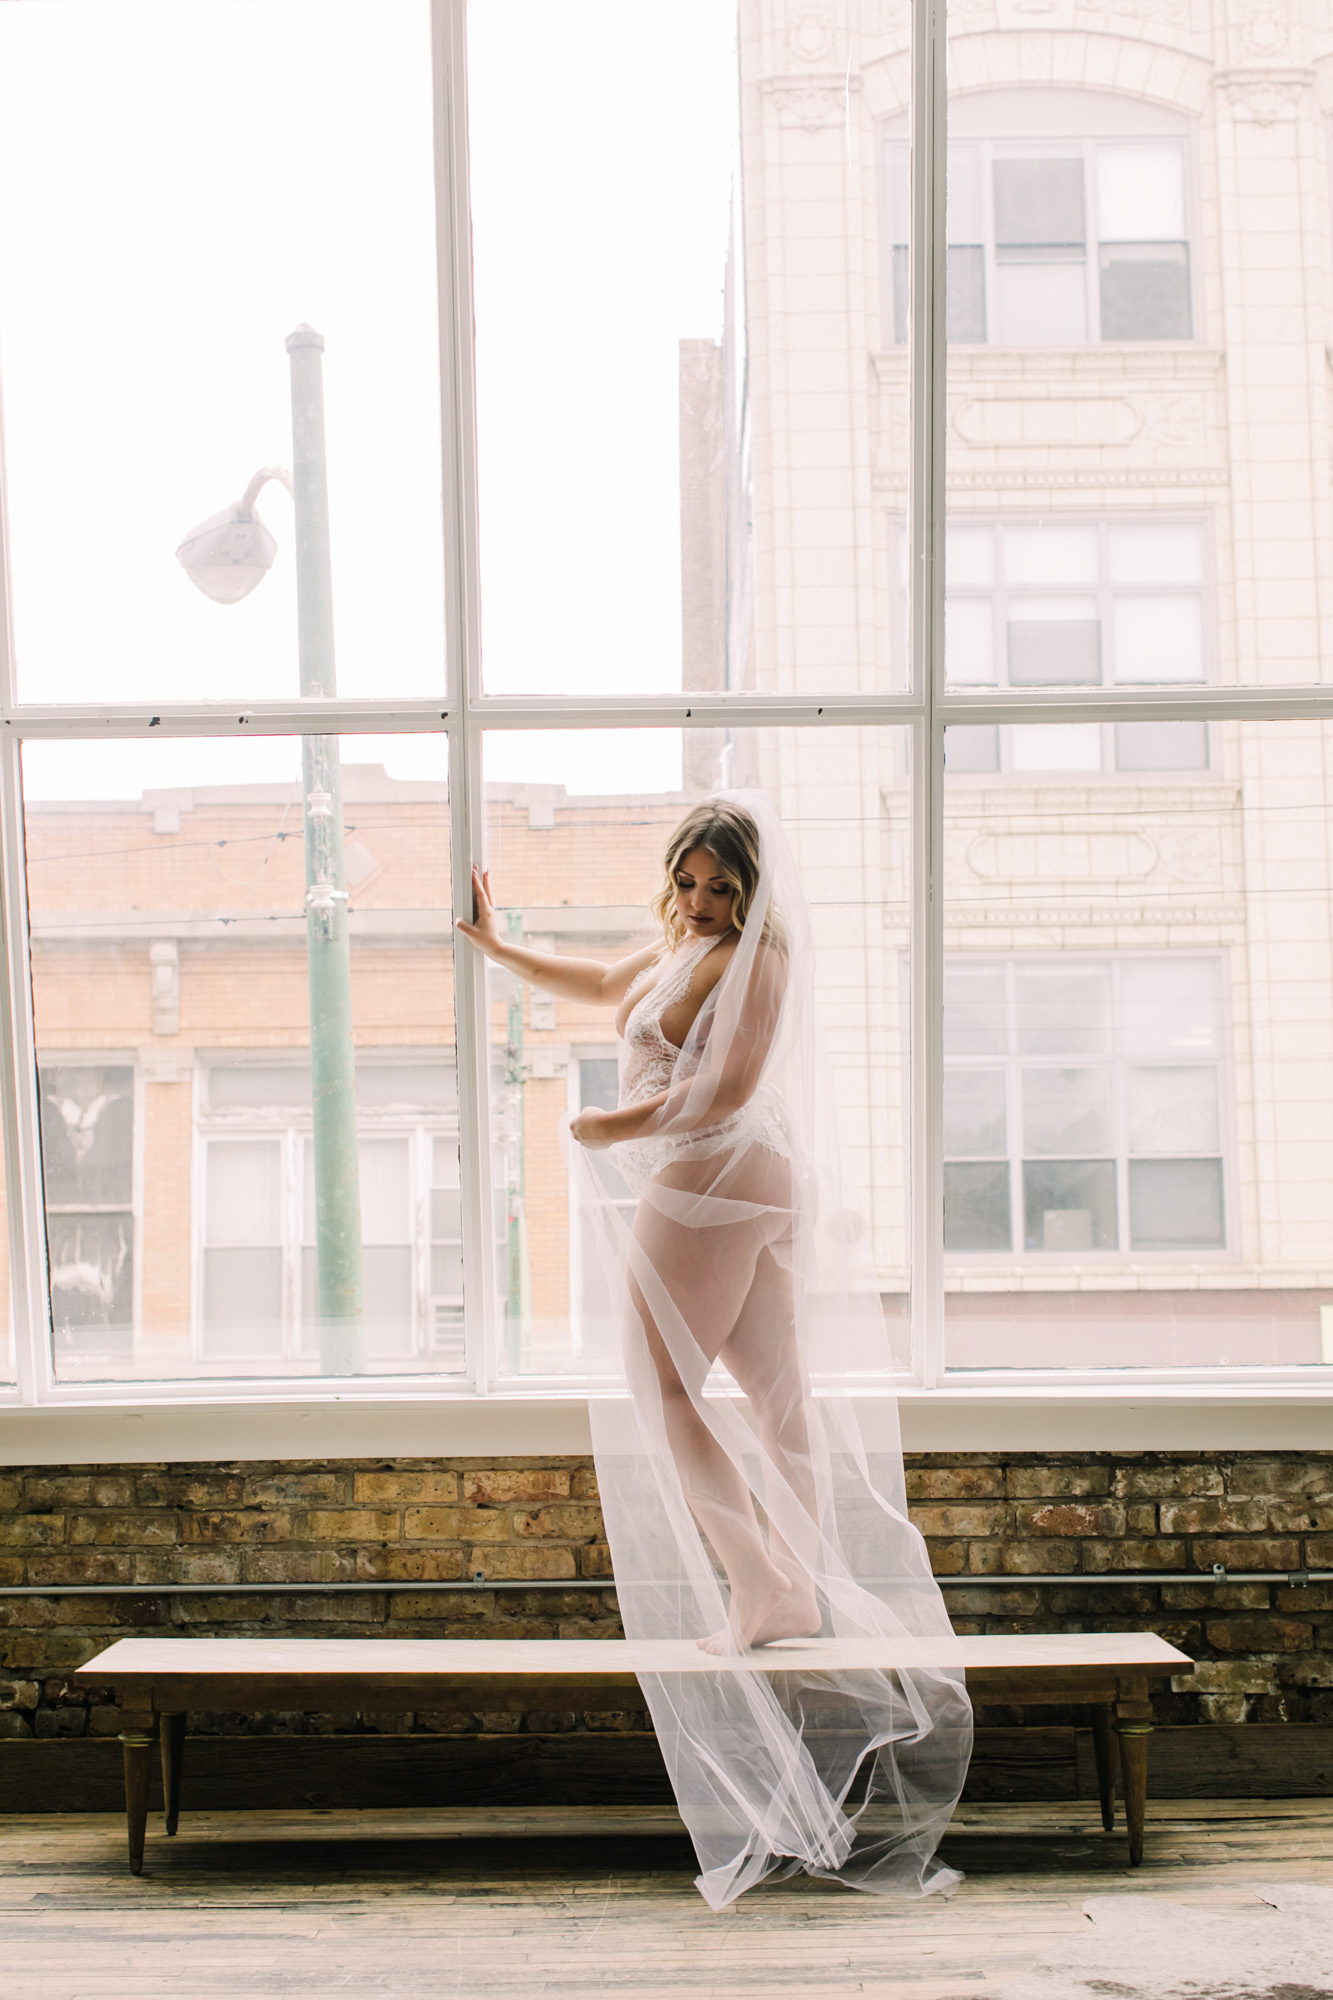 A bride poses in white lingerie and a wedding veil for her bridal boudoir shoot in Chicago.